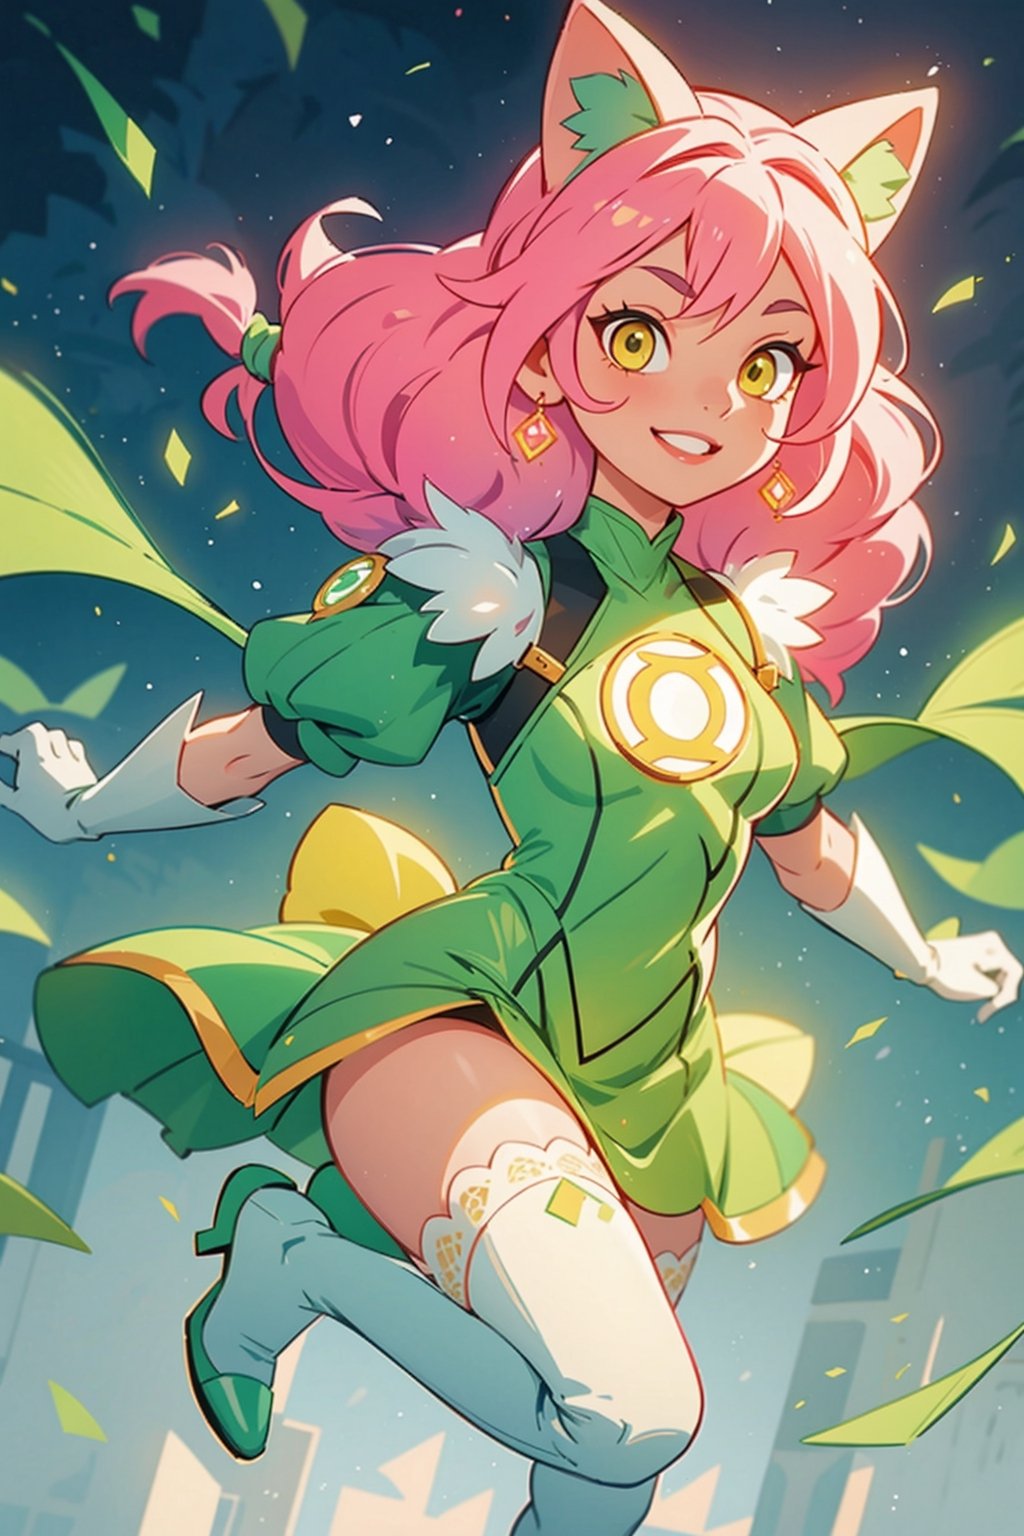 1girl, Portrait of the beautiful Lopadex, athletic, green lantern dress:1.2, pink hair:1.2, yellow eyes:1.2, pink cat ears:1.2, white leather boots, white leather gloves, smiling,braids,make up,voluminous lighting, Best Quality, Masterpiece, intricate details, tonemapping, sharp-focus, hyper detailed, Trending on ArtStation, 